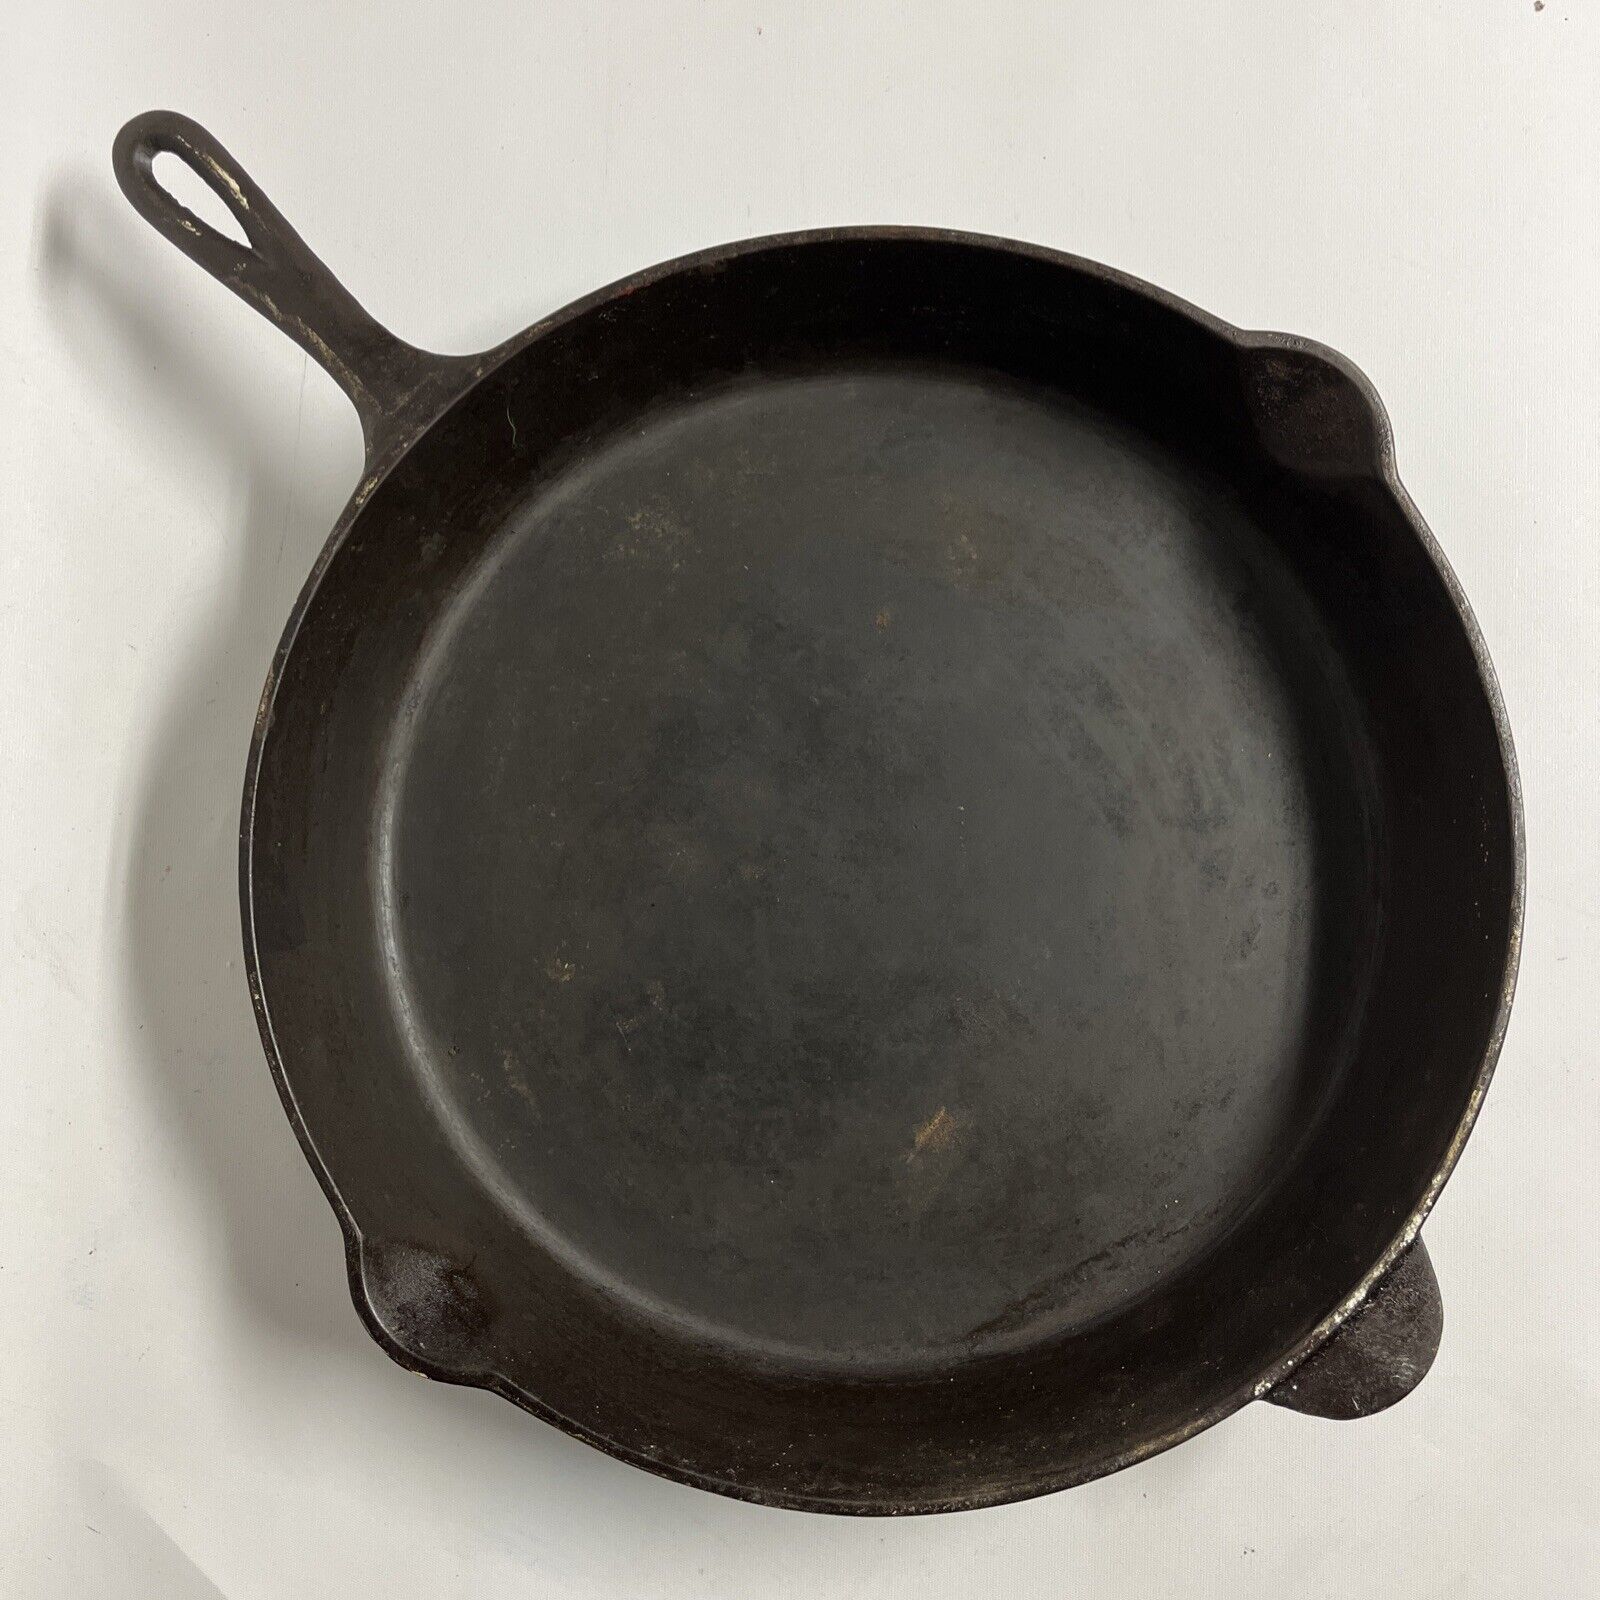 Vintage Lodge 3 Notch #14 Cast Iron Skillet Pan 15 Inch Large Cook Ware